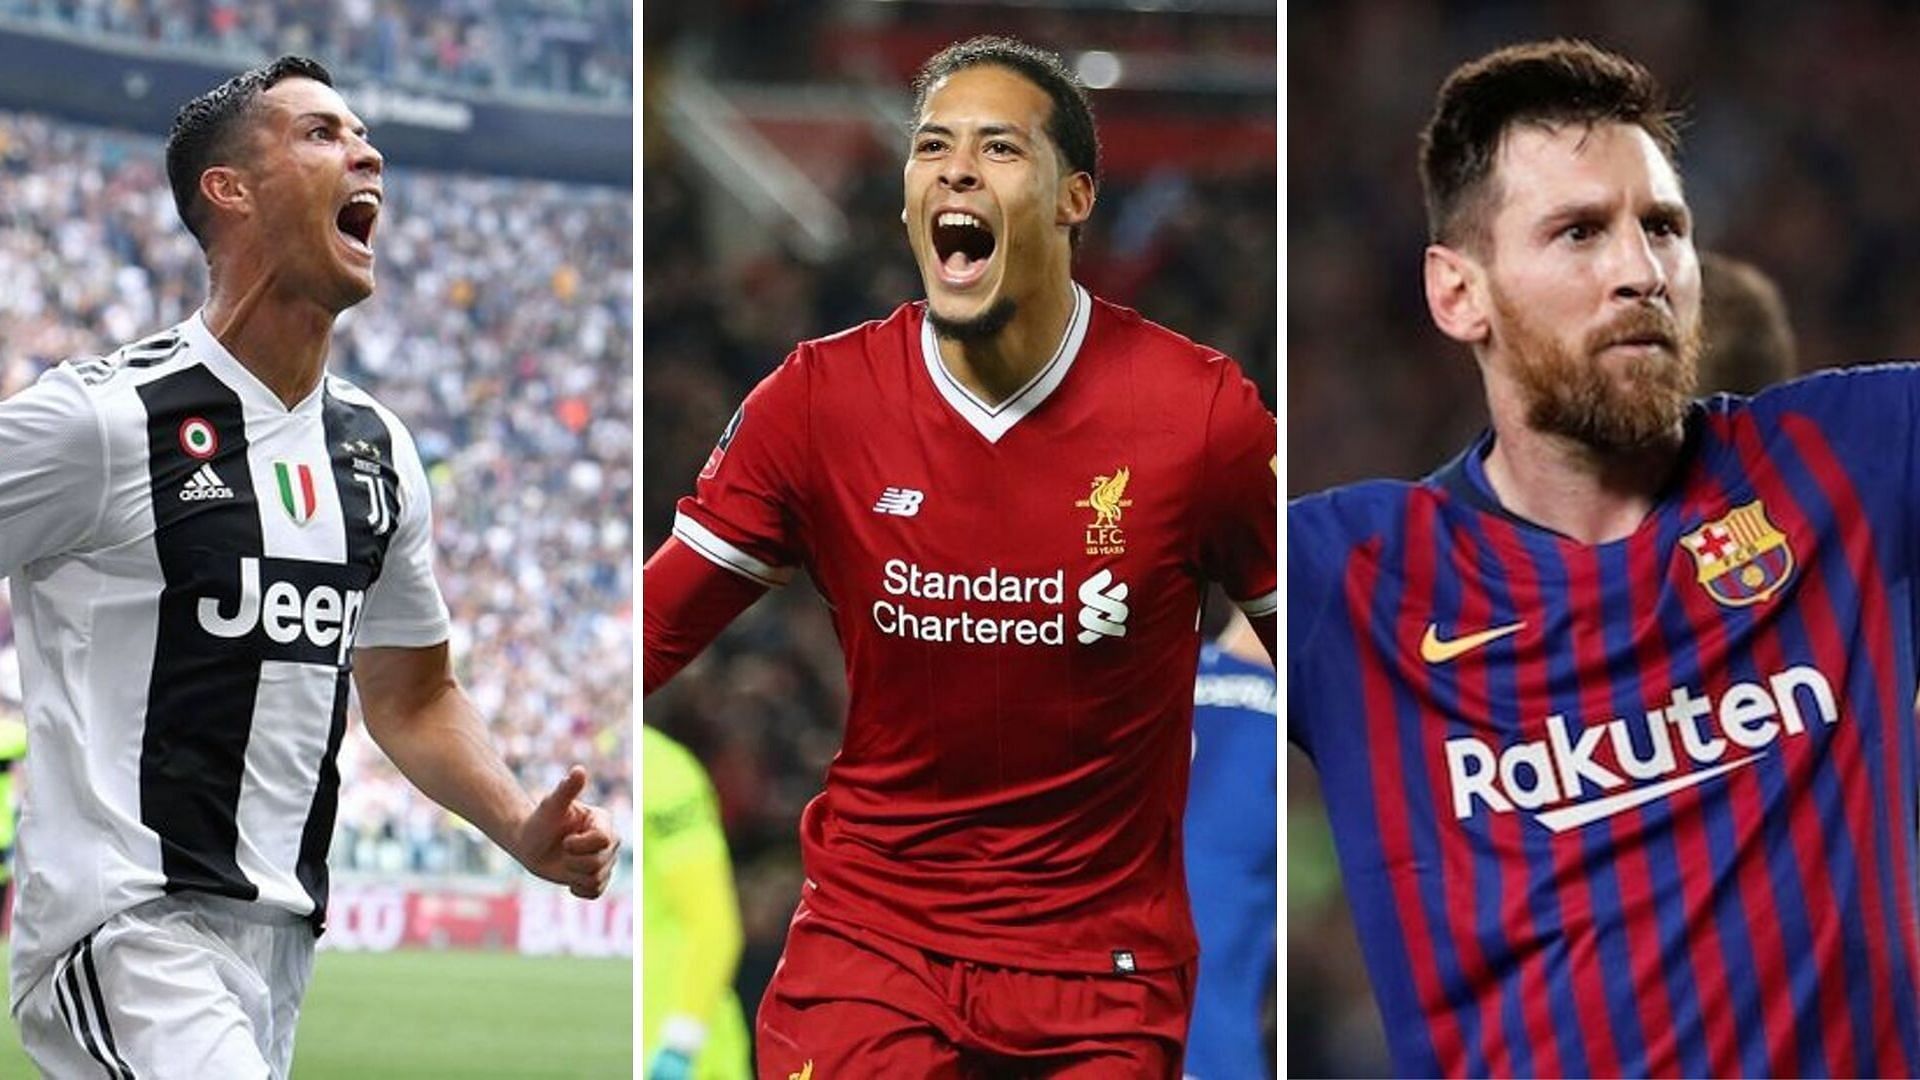 From left to right: Cristiano Ronaldo, Virgil Van Dijk and Lionel Messi.